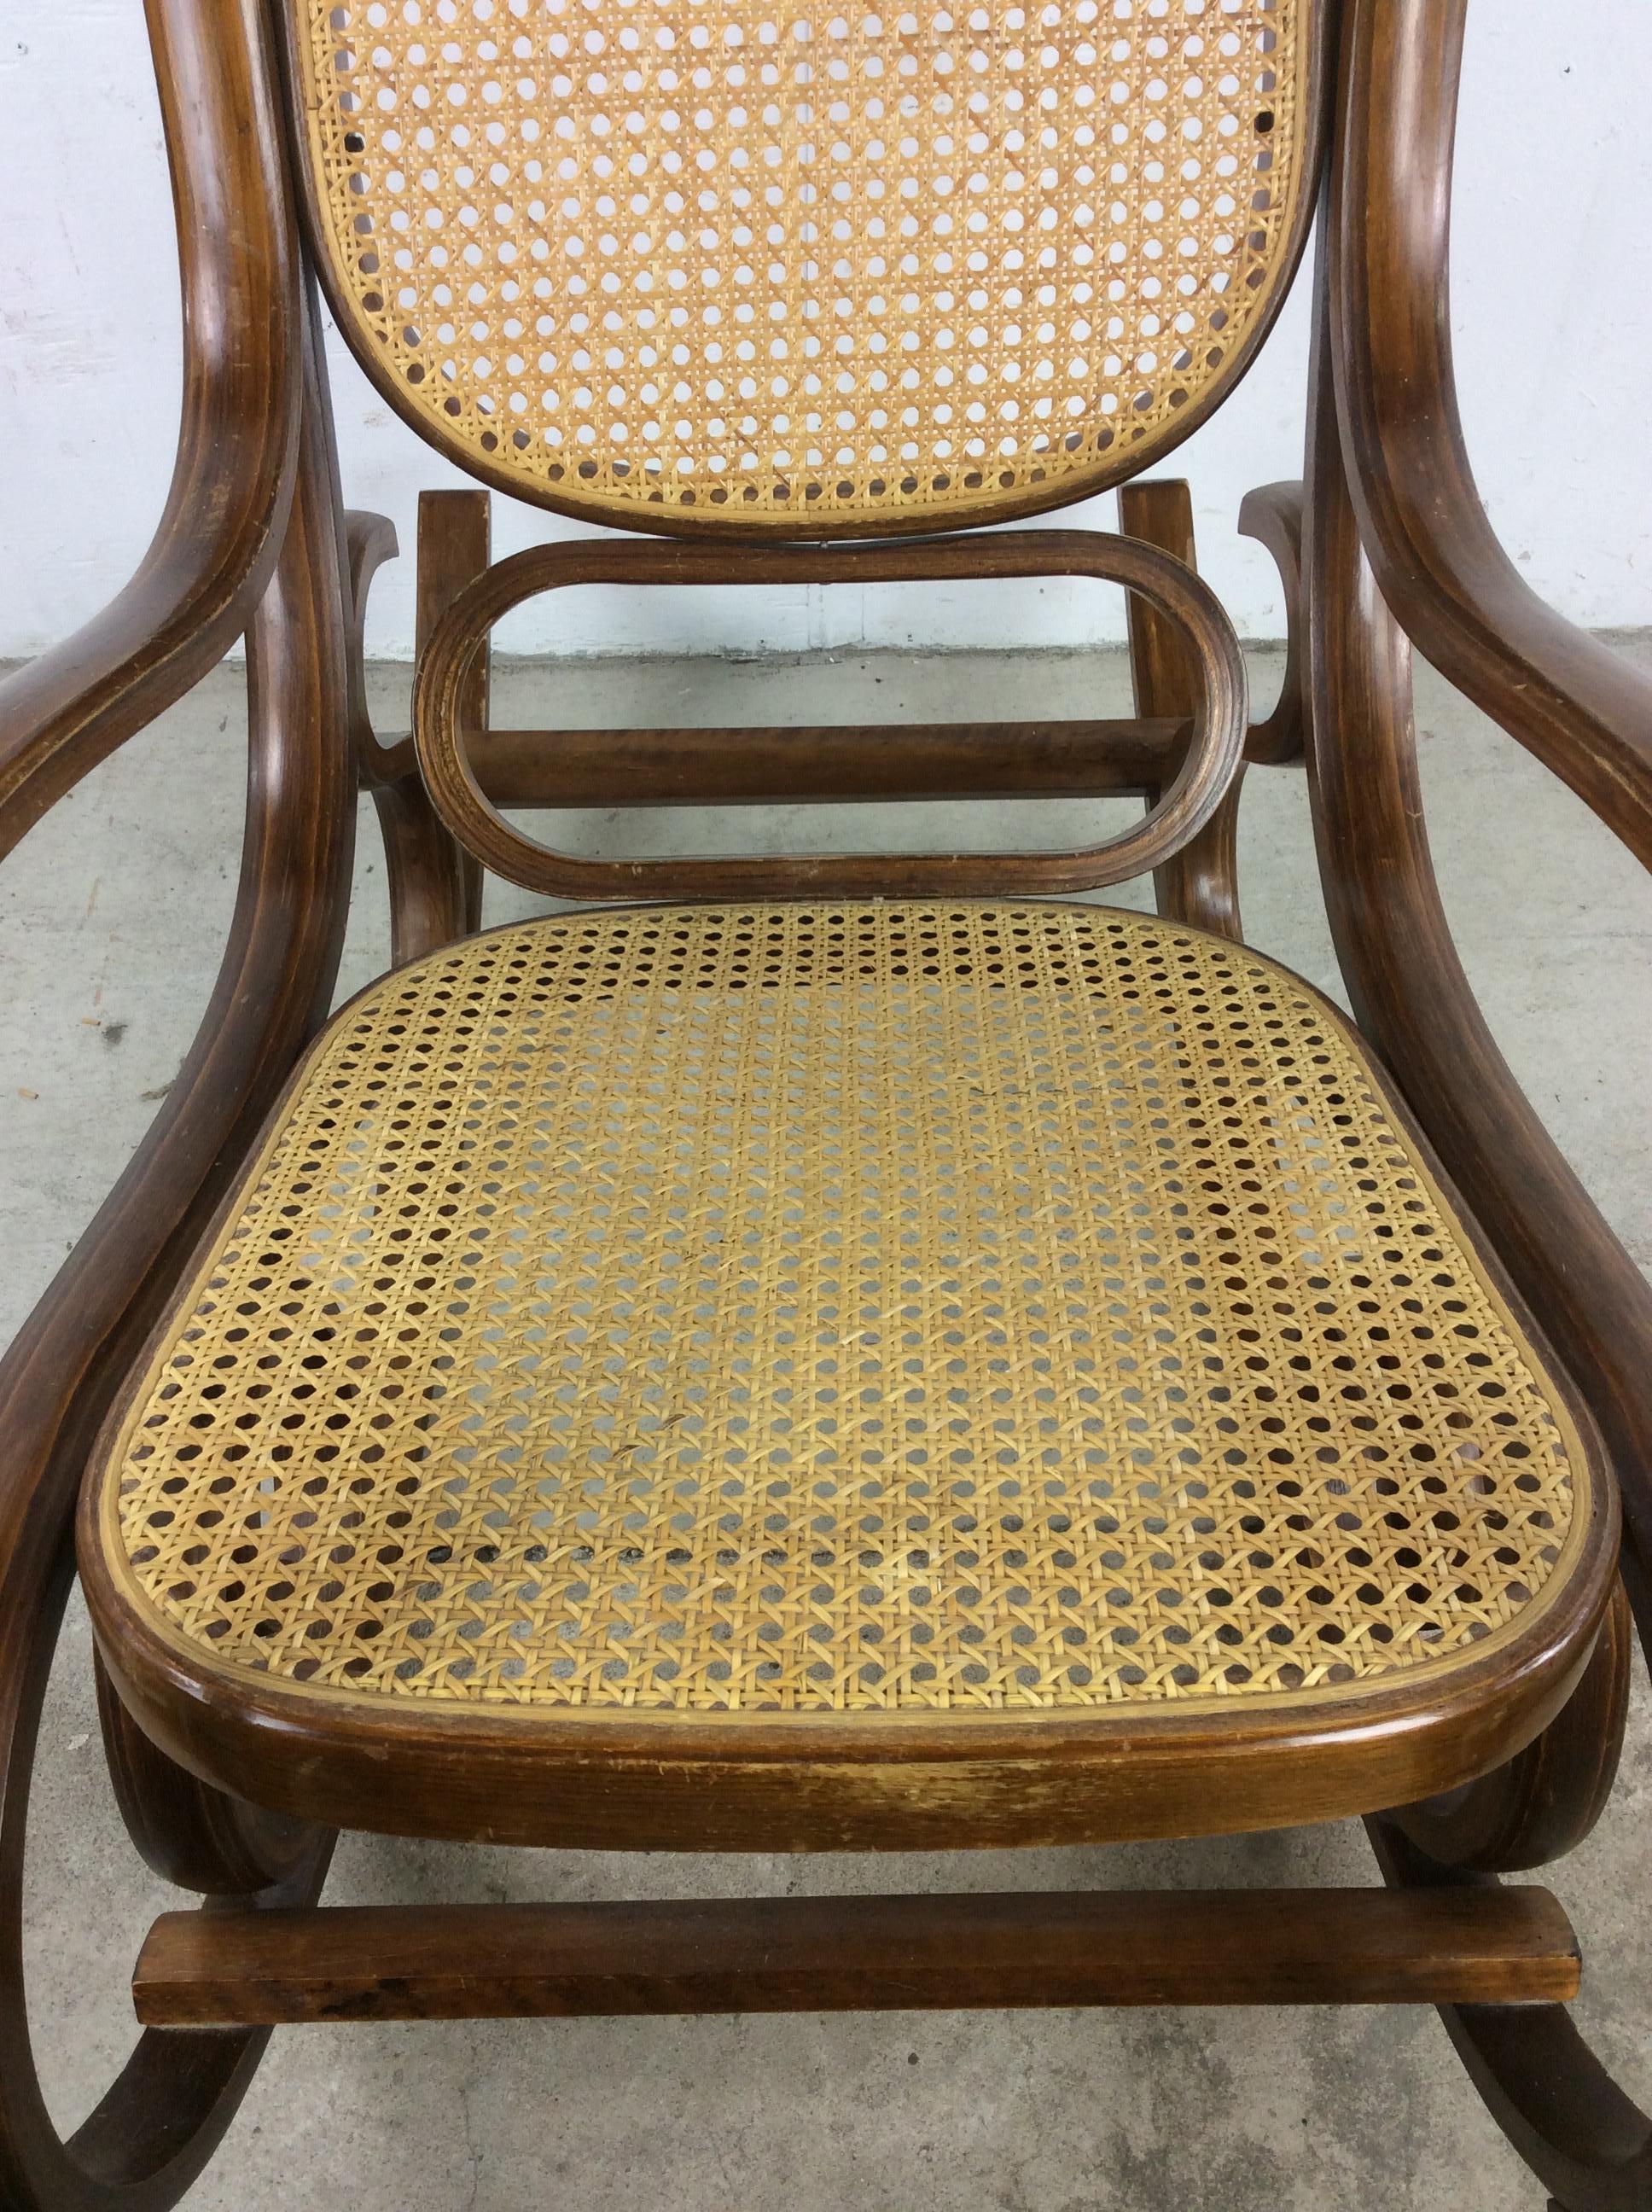 American Mid Century Modern Bentwood Rocking Chair with Caning